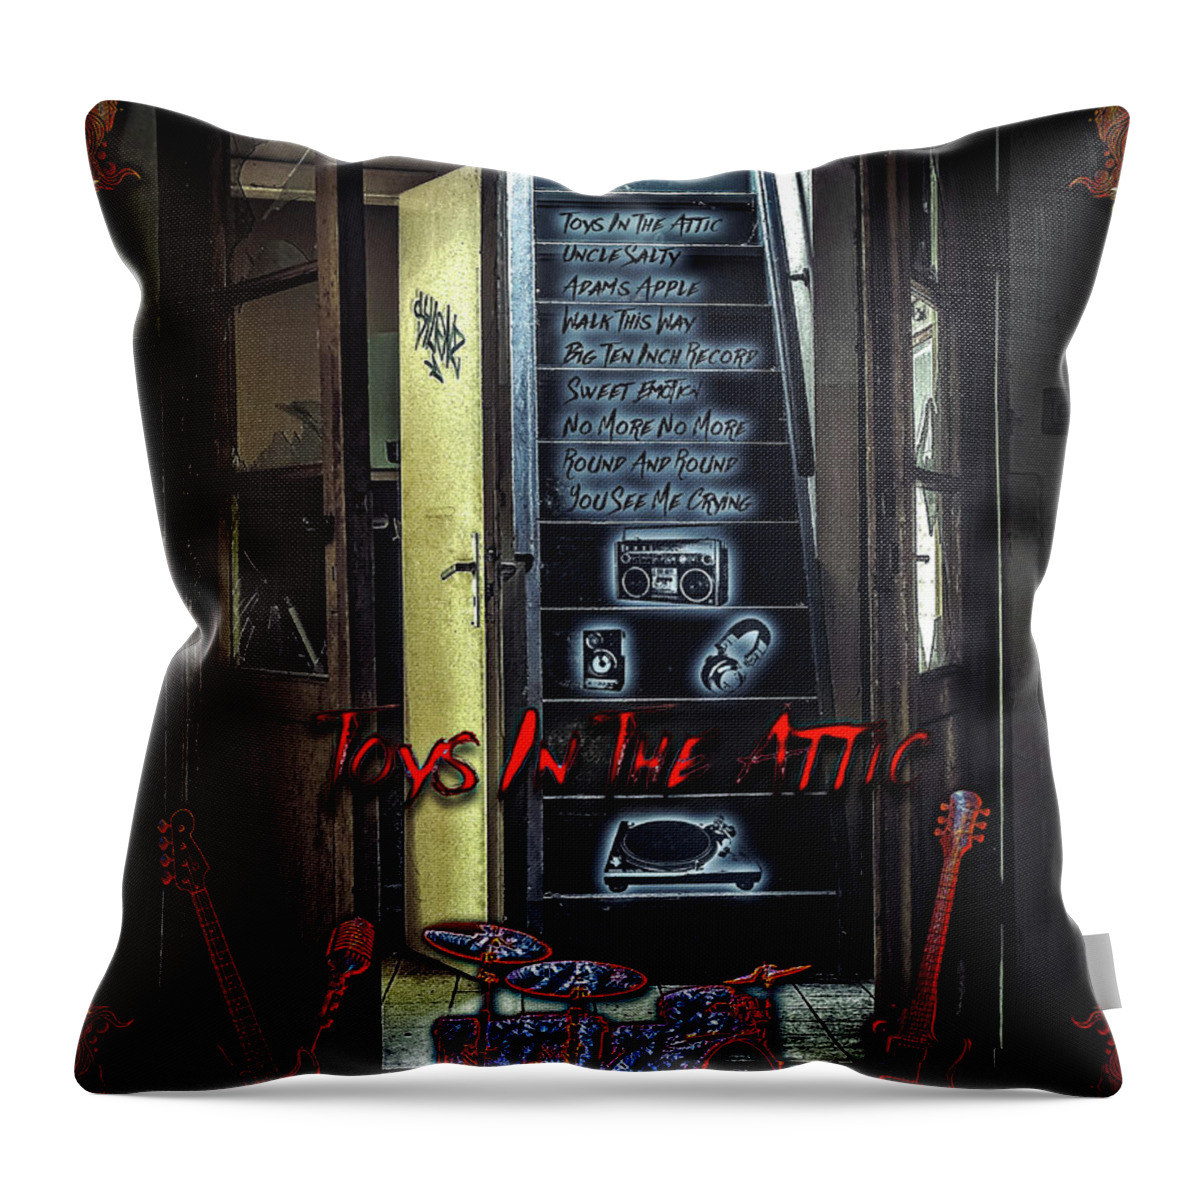 Walk Throw Pillow featuring the digital art Toys In The Attic by Michael Damiani